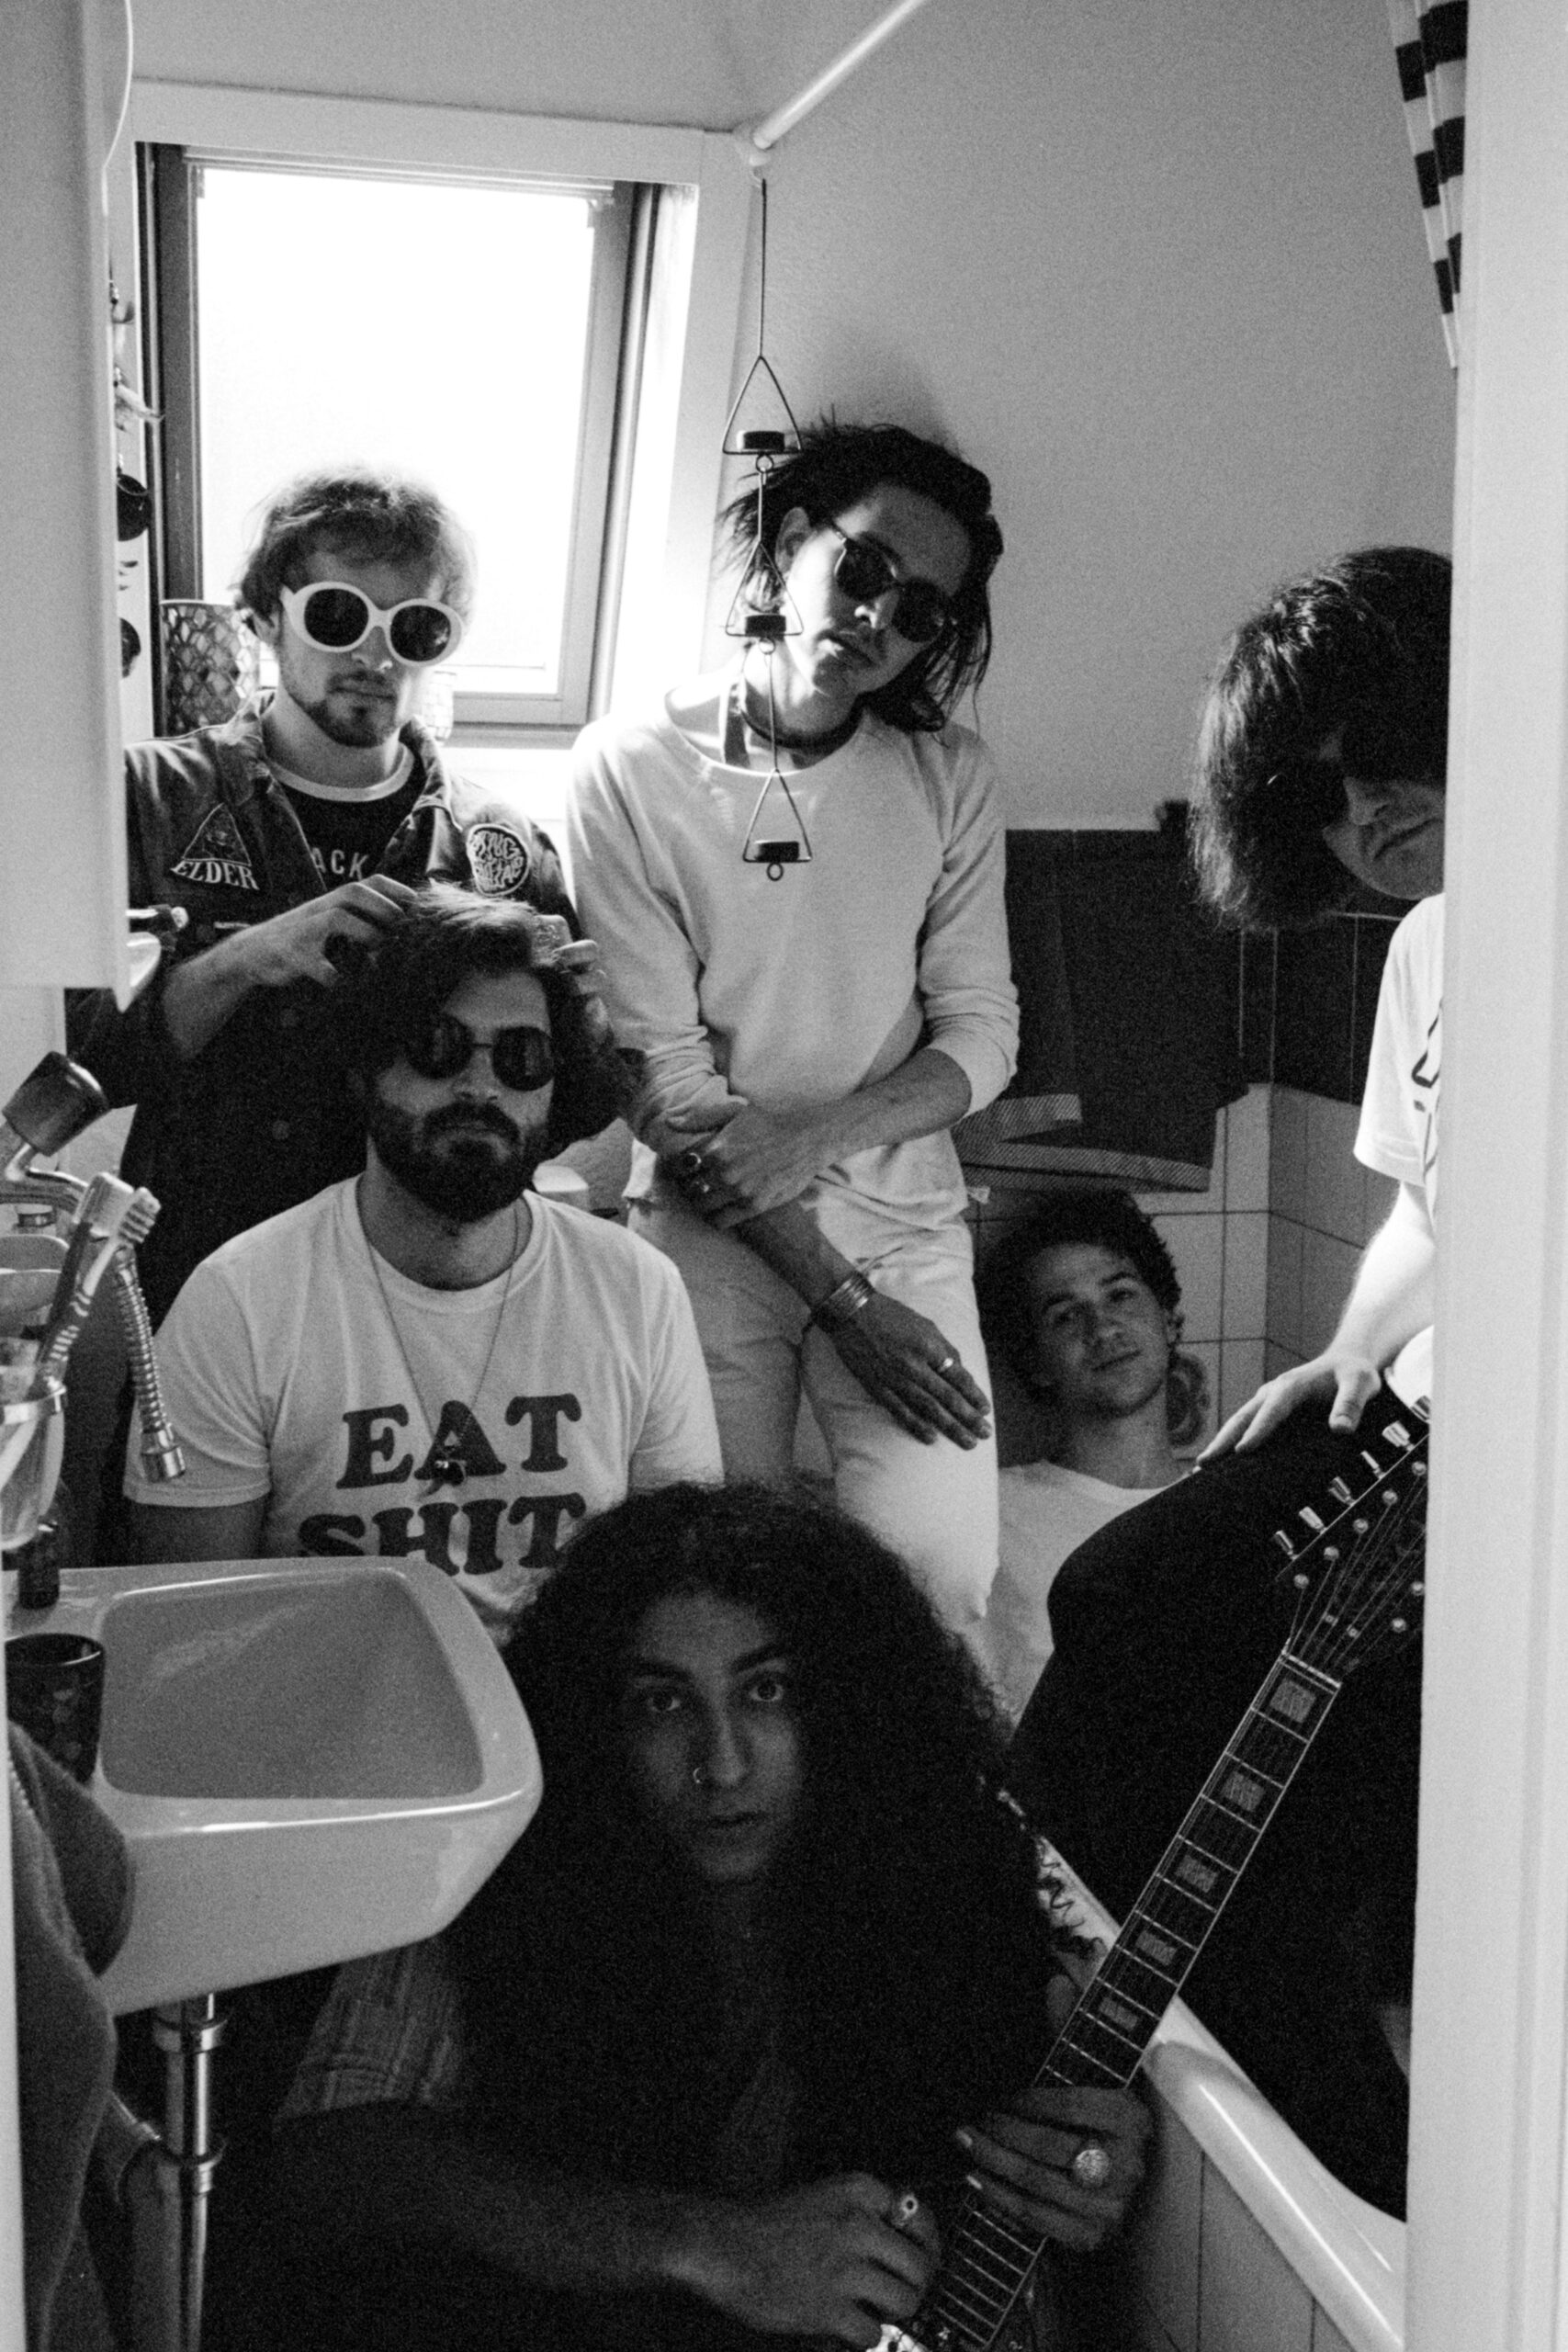 Members of a band posing in a small bathroom.